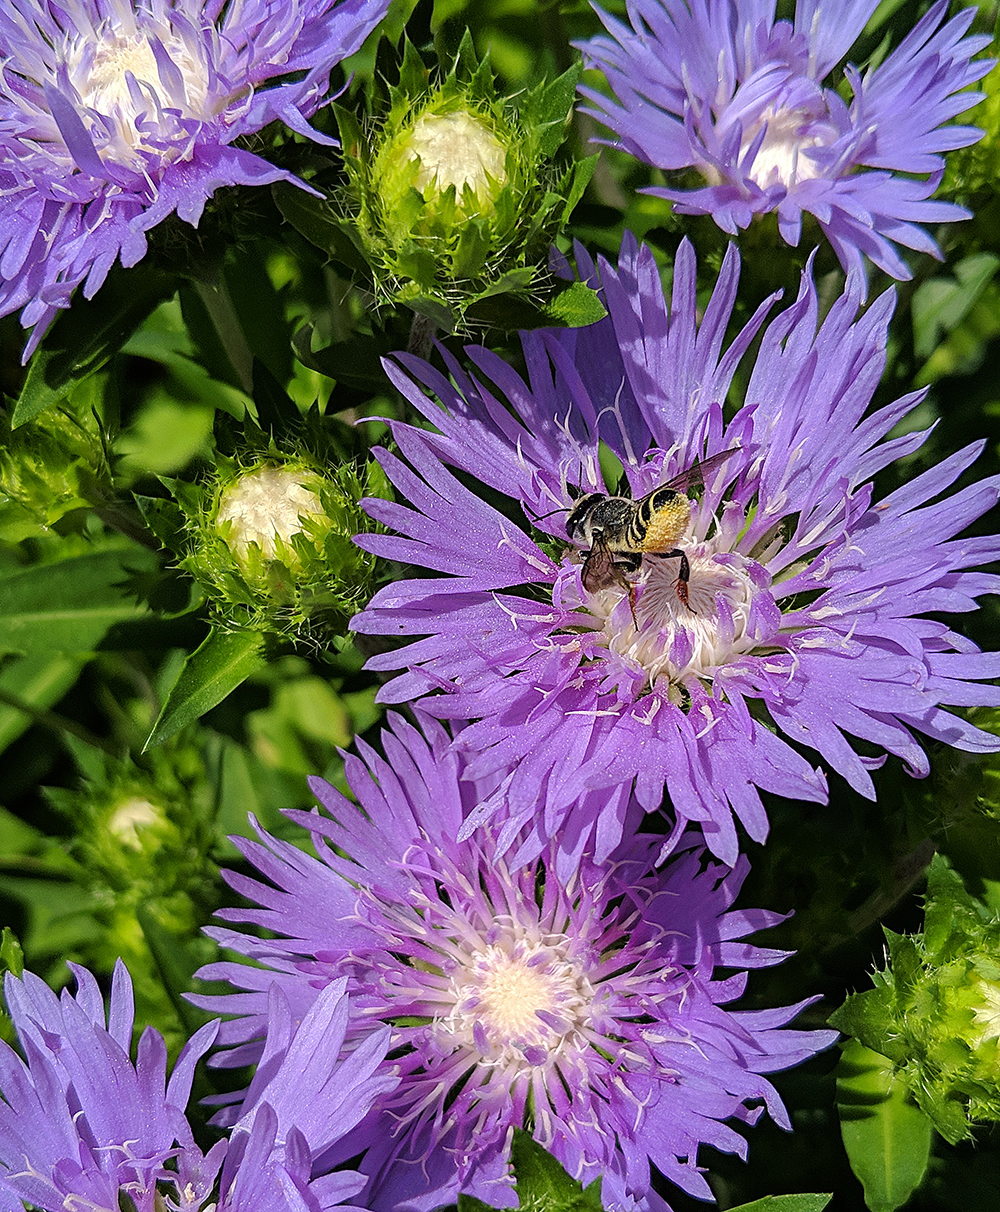 Leafcutter bee on stoke's aster.